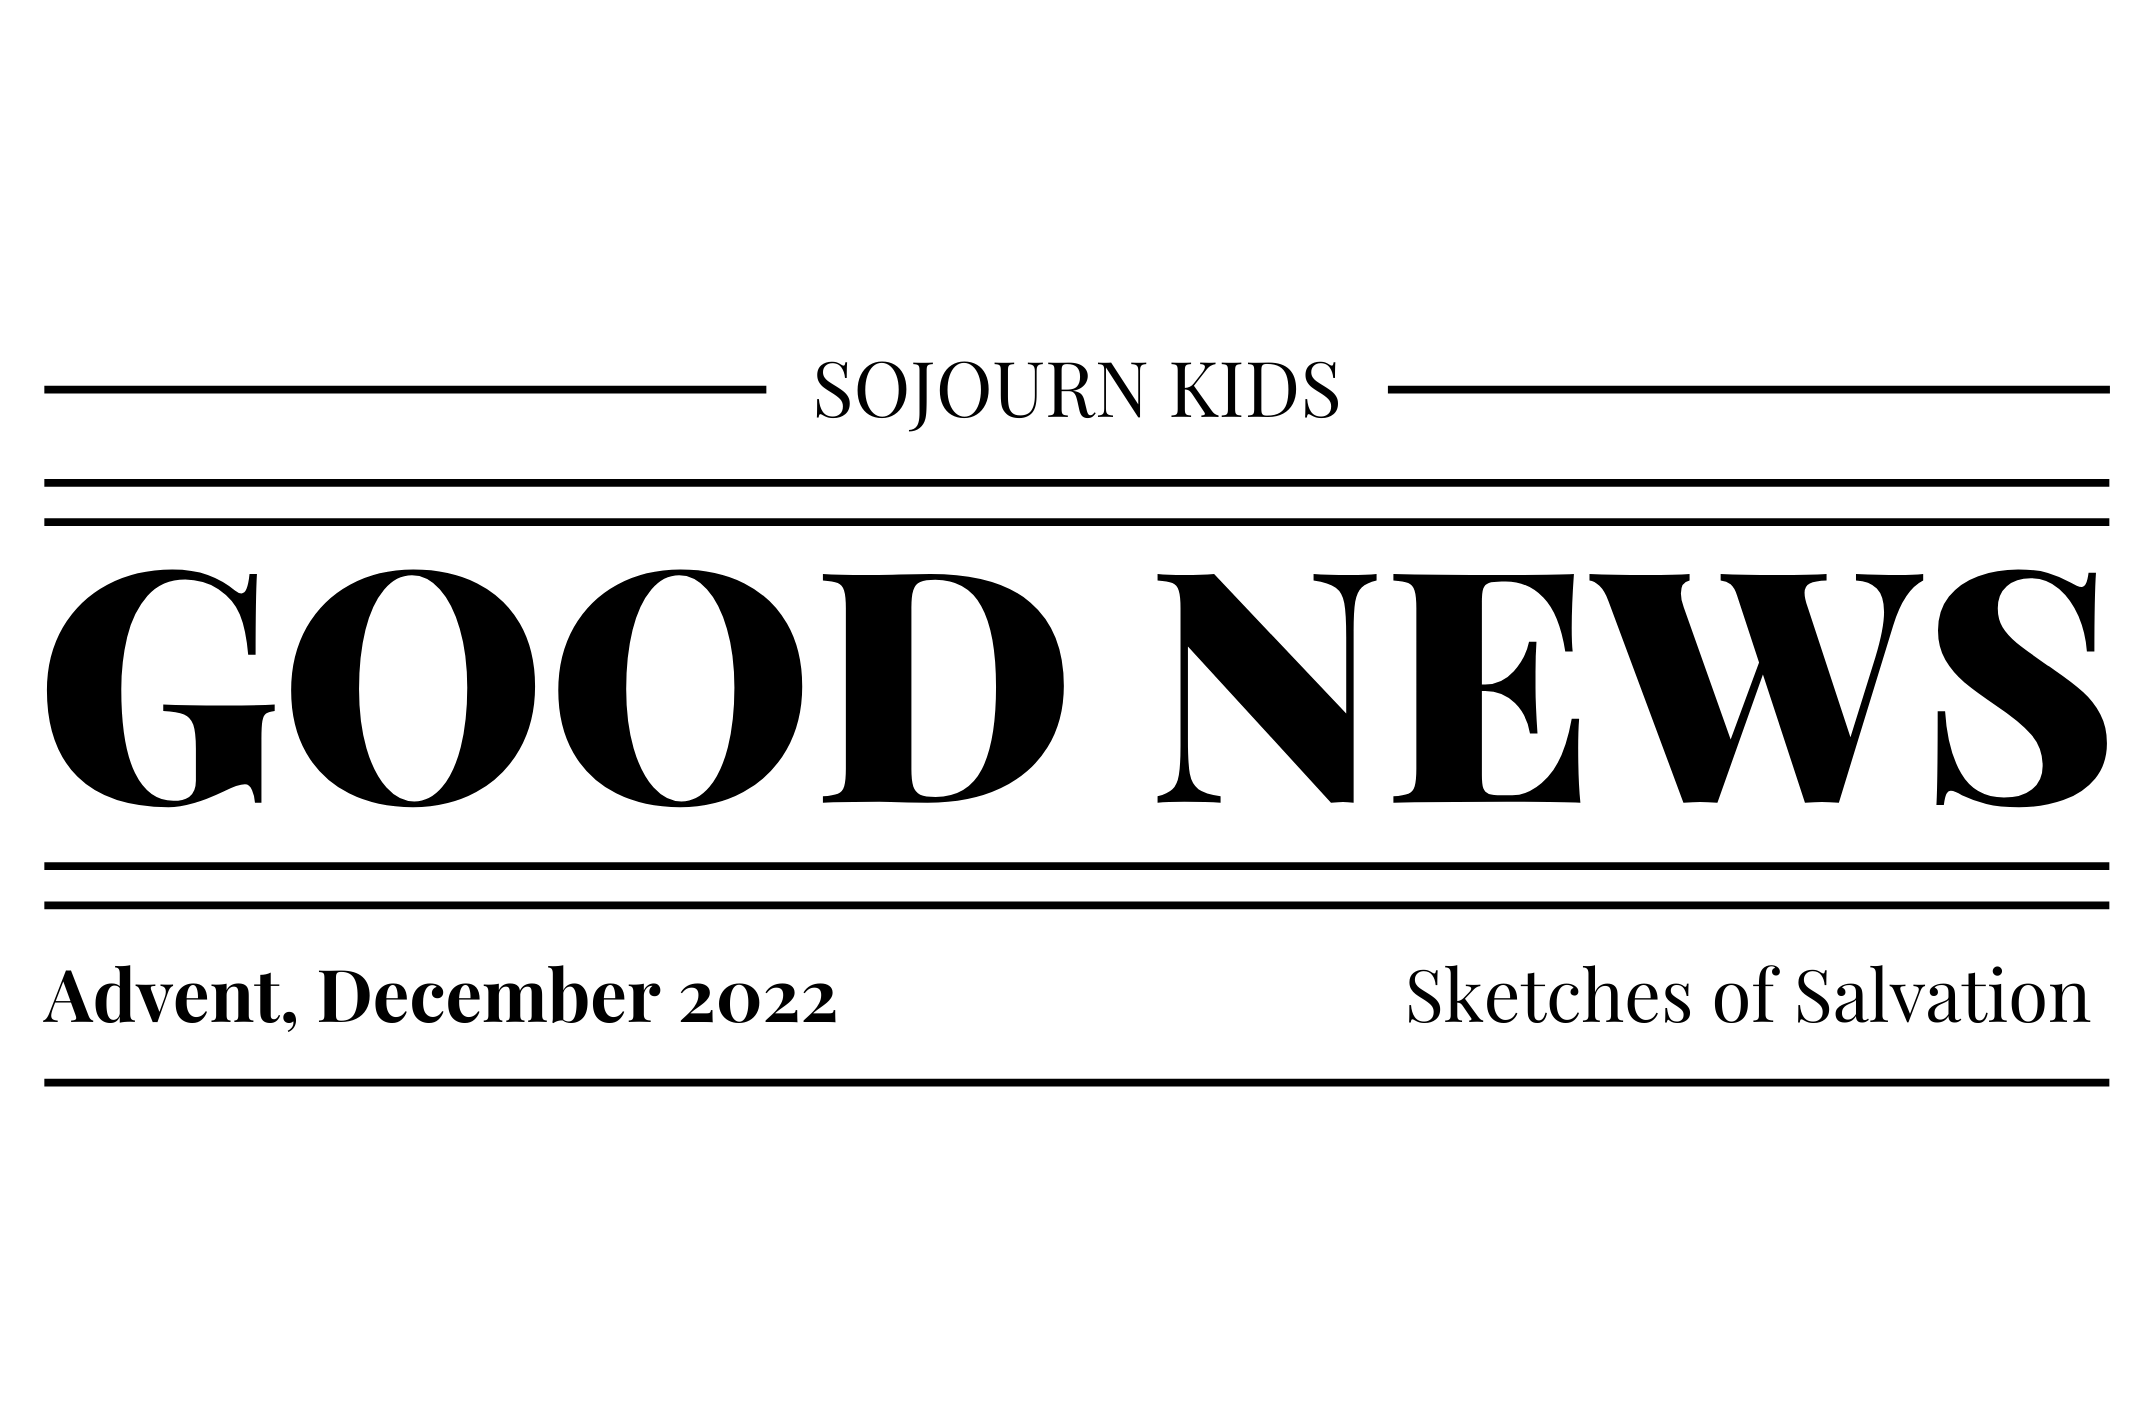 Sojourn Kids Advent 2022 (2154 × 1428 px)